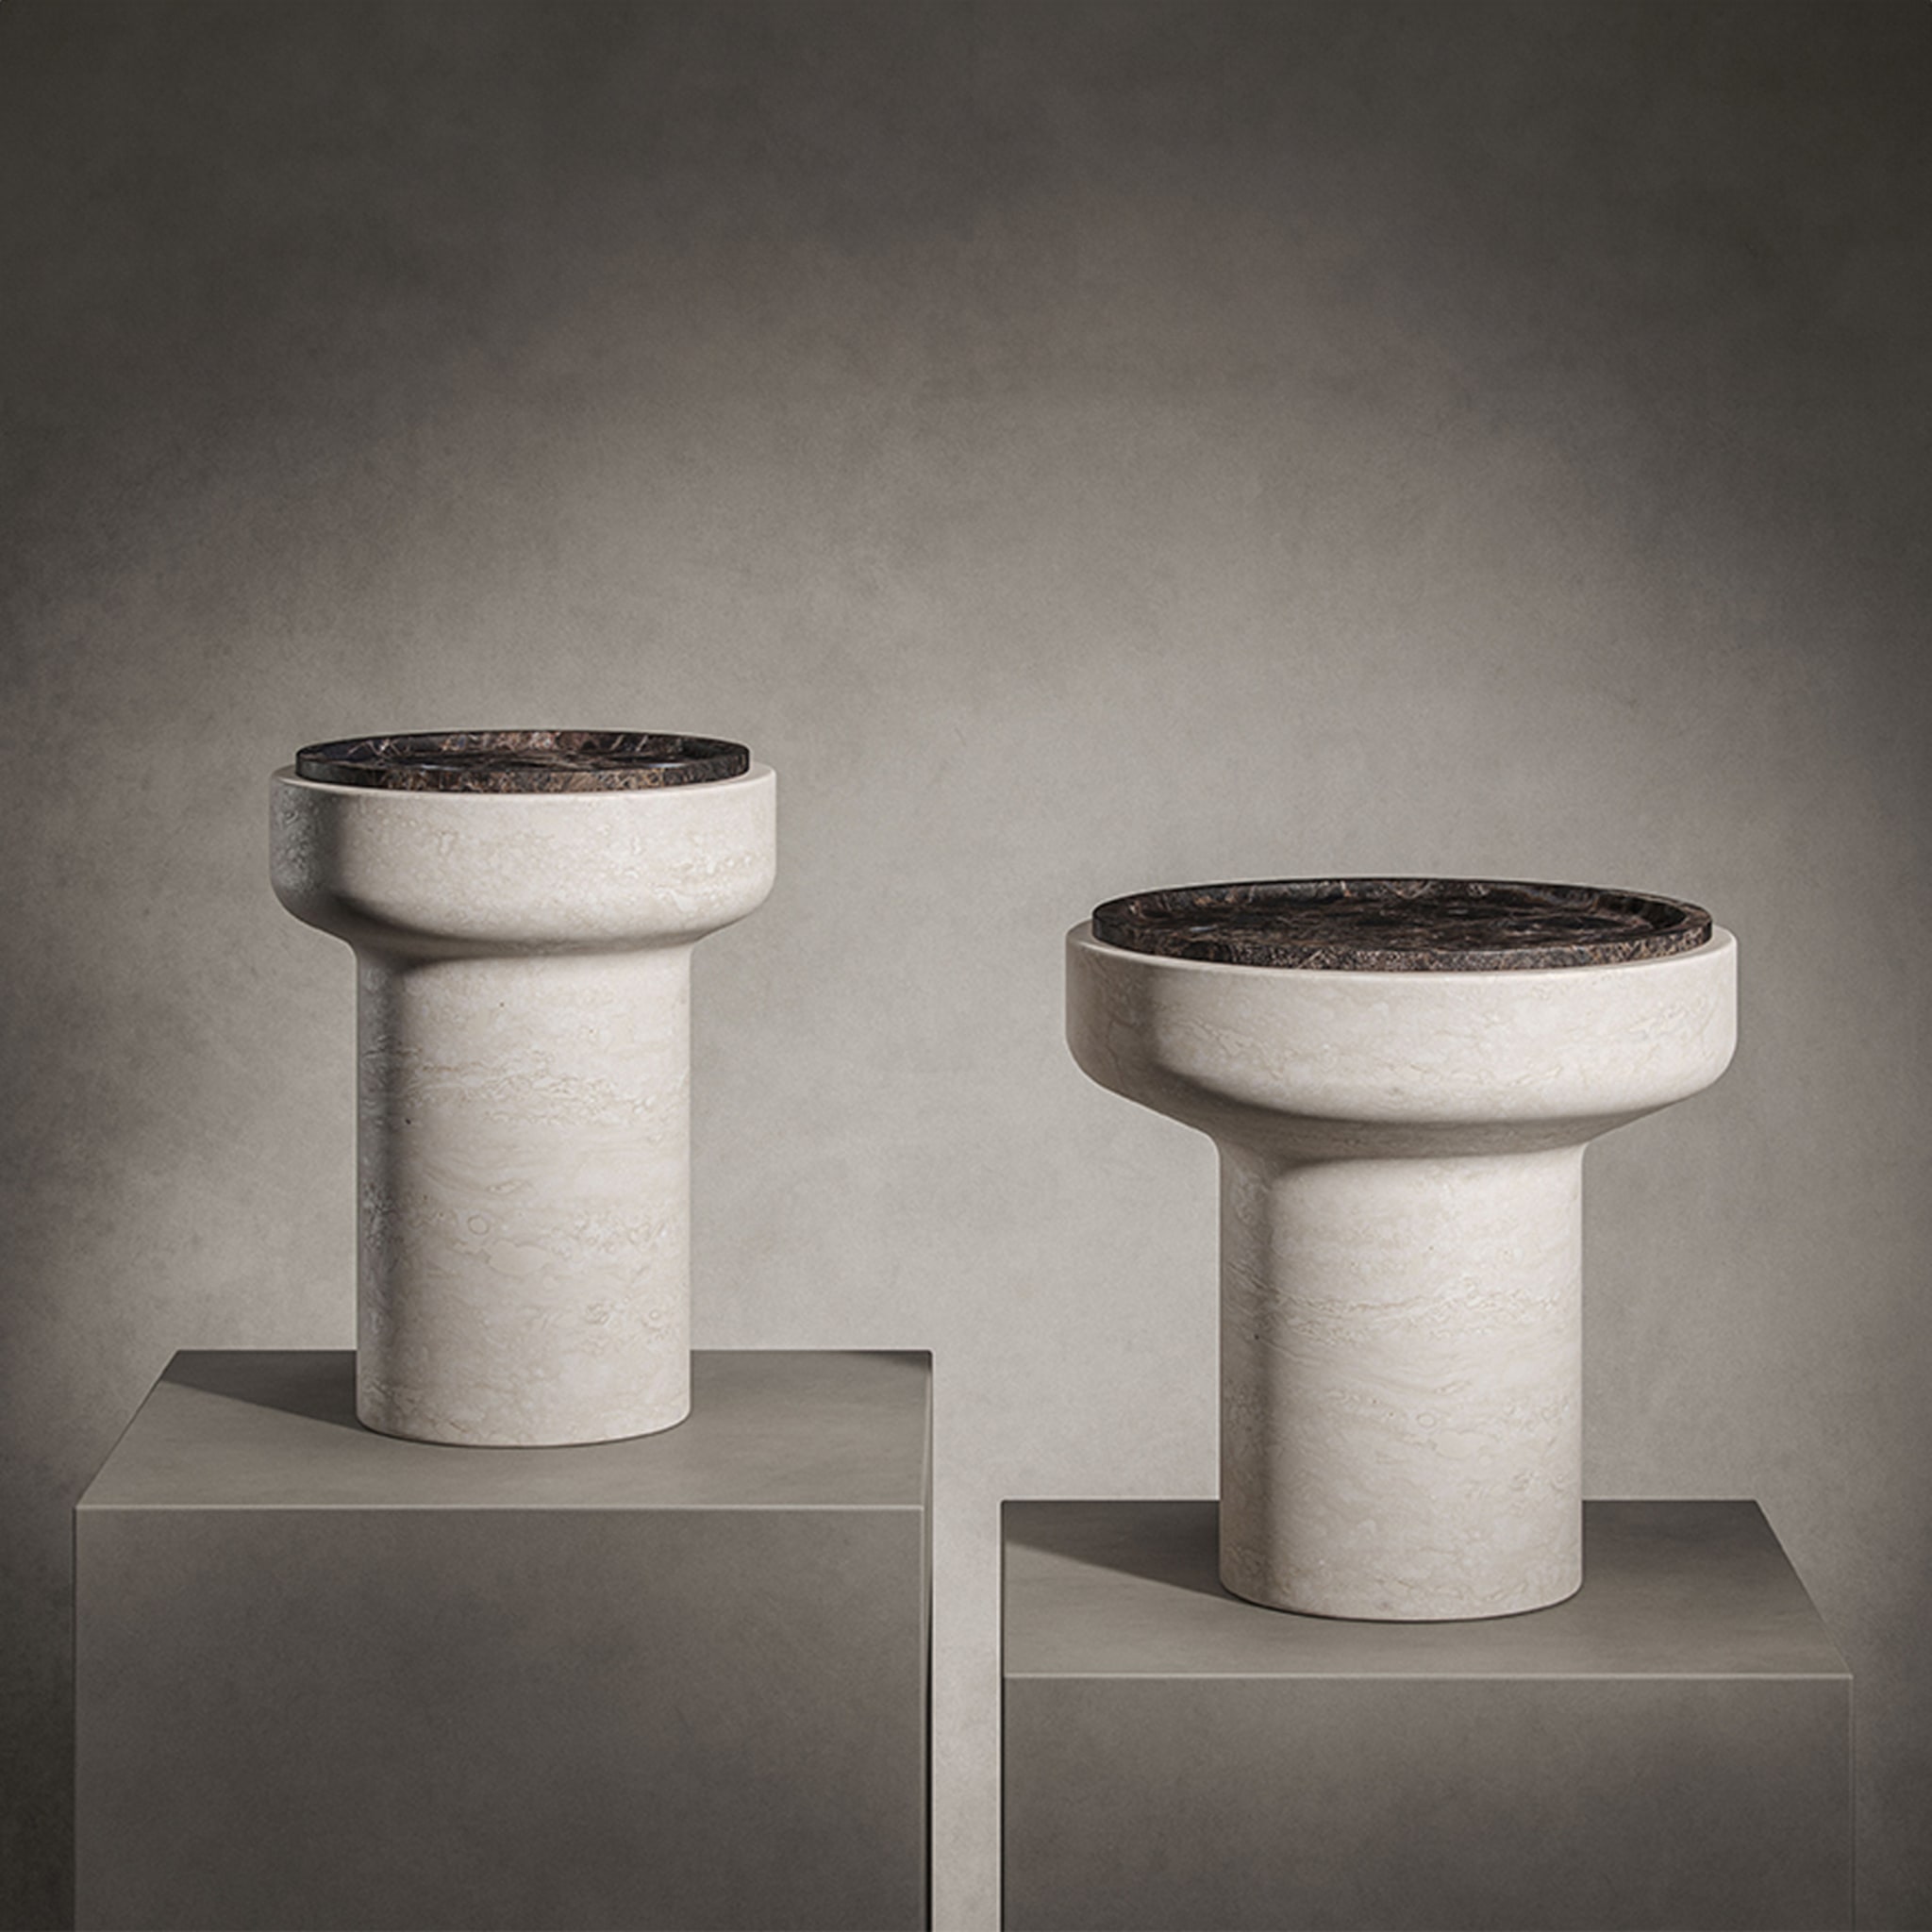 Tivoli Side Table in travertine and marble by Ivan Colominas - Alternative view 2